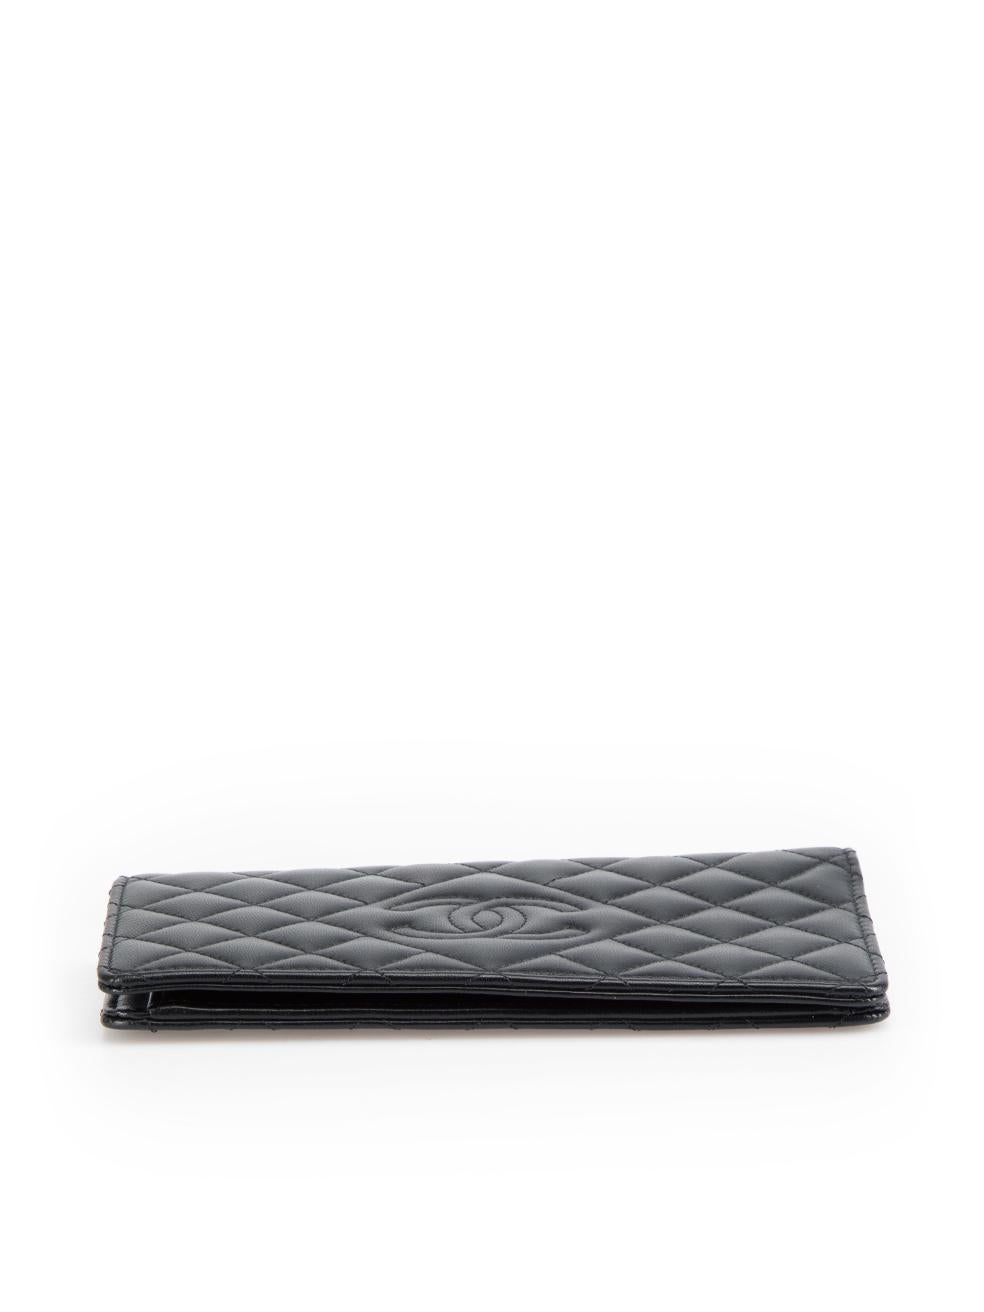 Women's Chanel Black Leather CC Quilted Bilfold Wallet For Sale